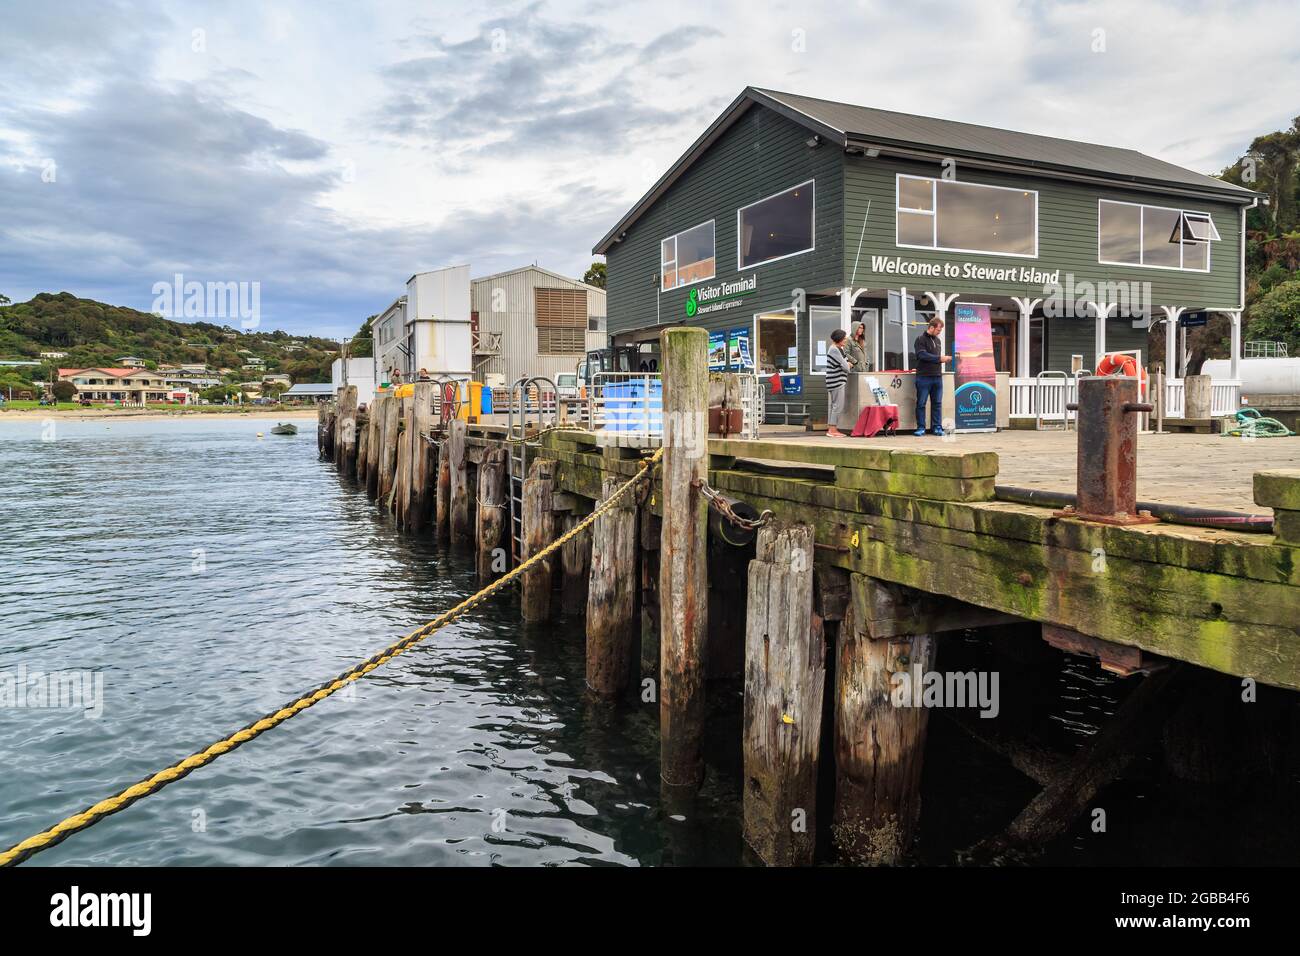 The visitor center of Oban, the only town on Stewart Island, New Zealand, at the end of the town wharf Stock Photo